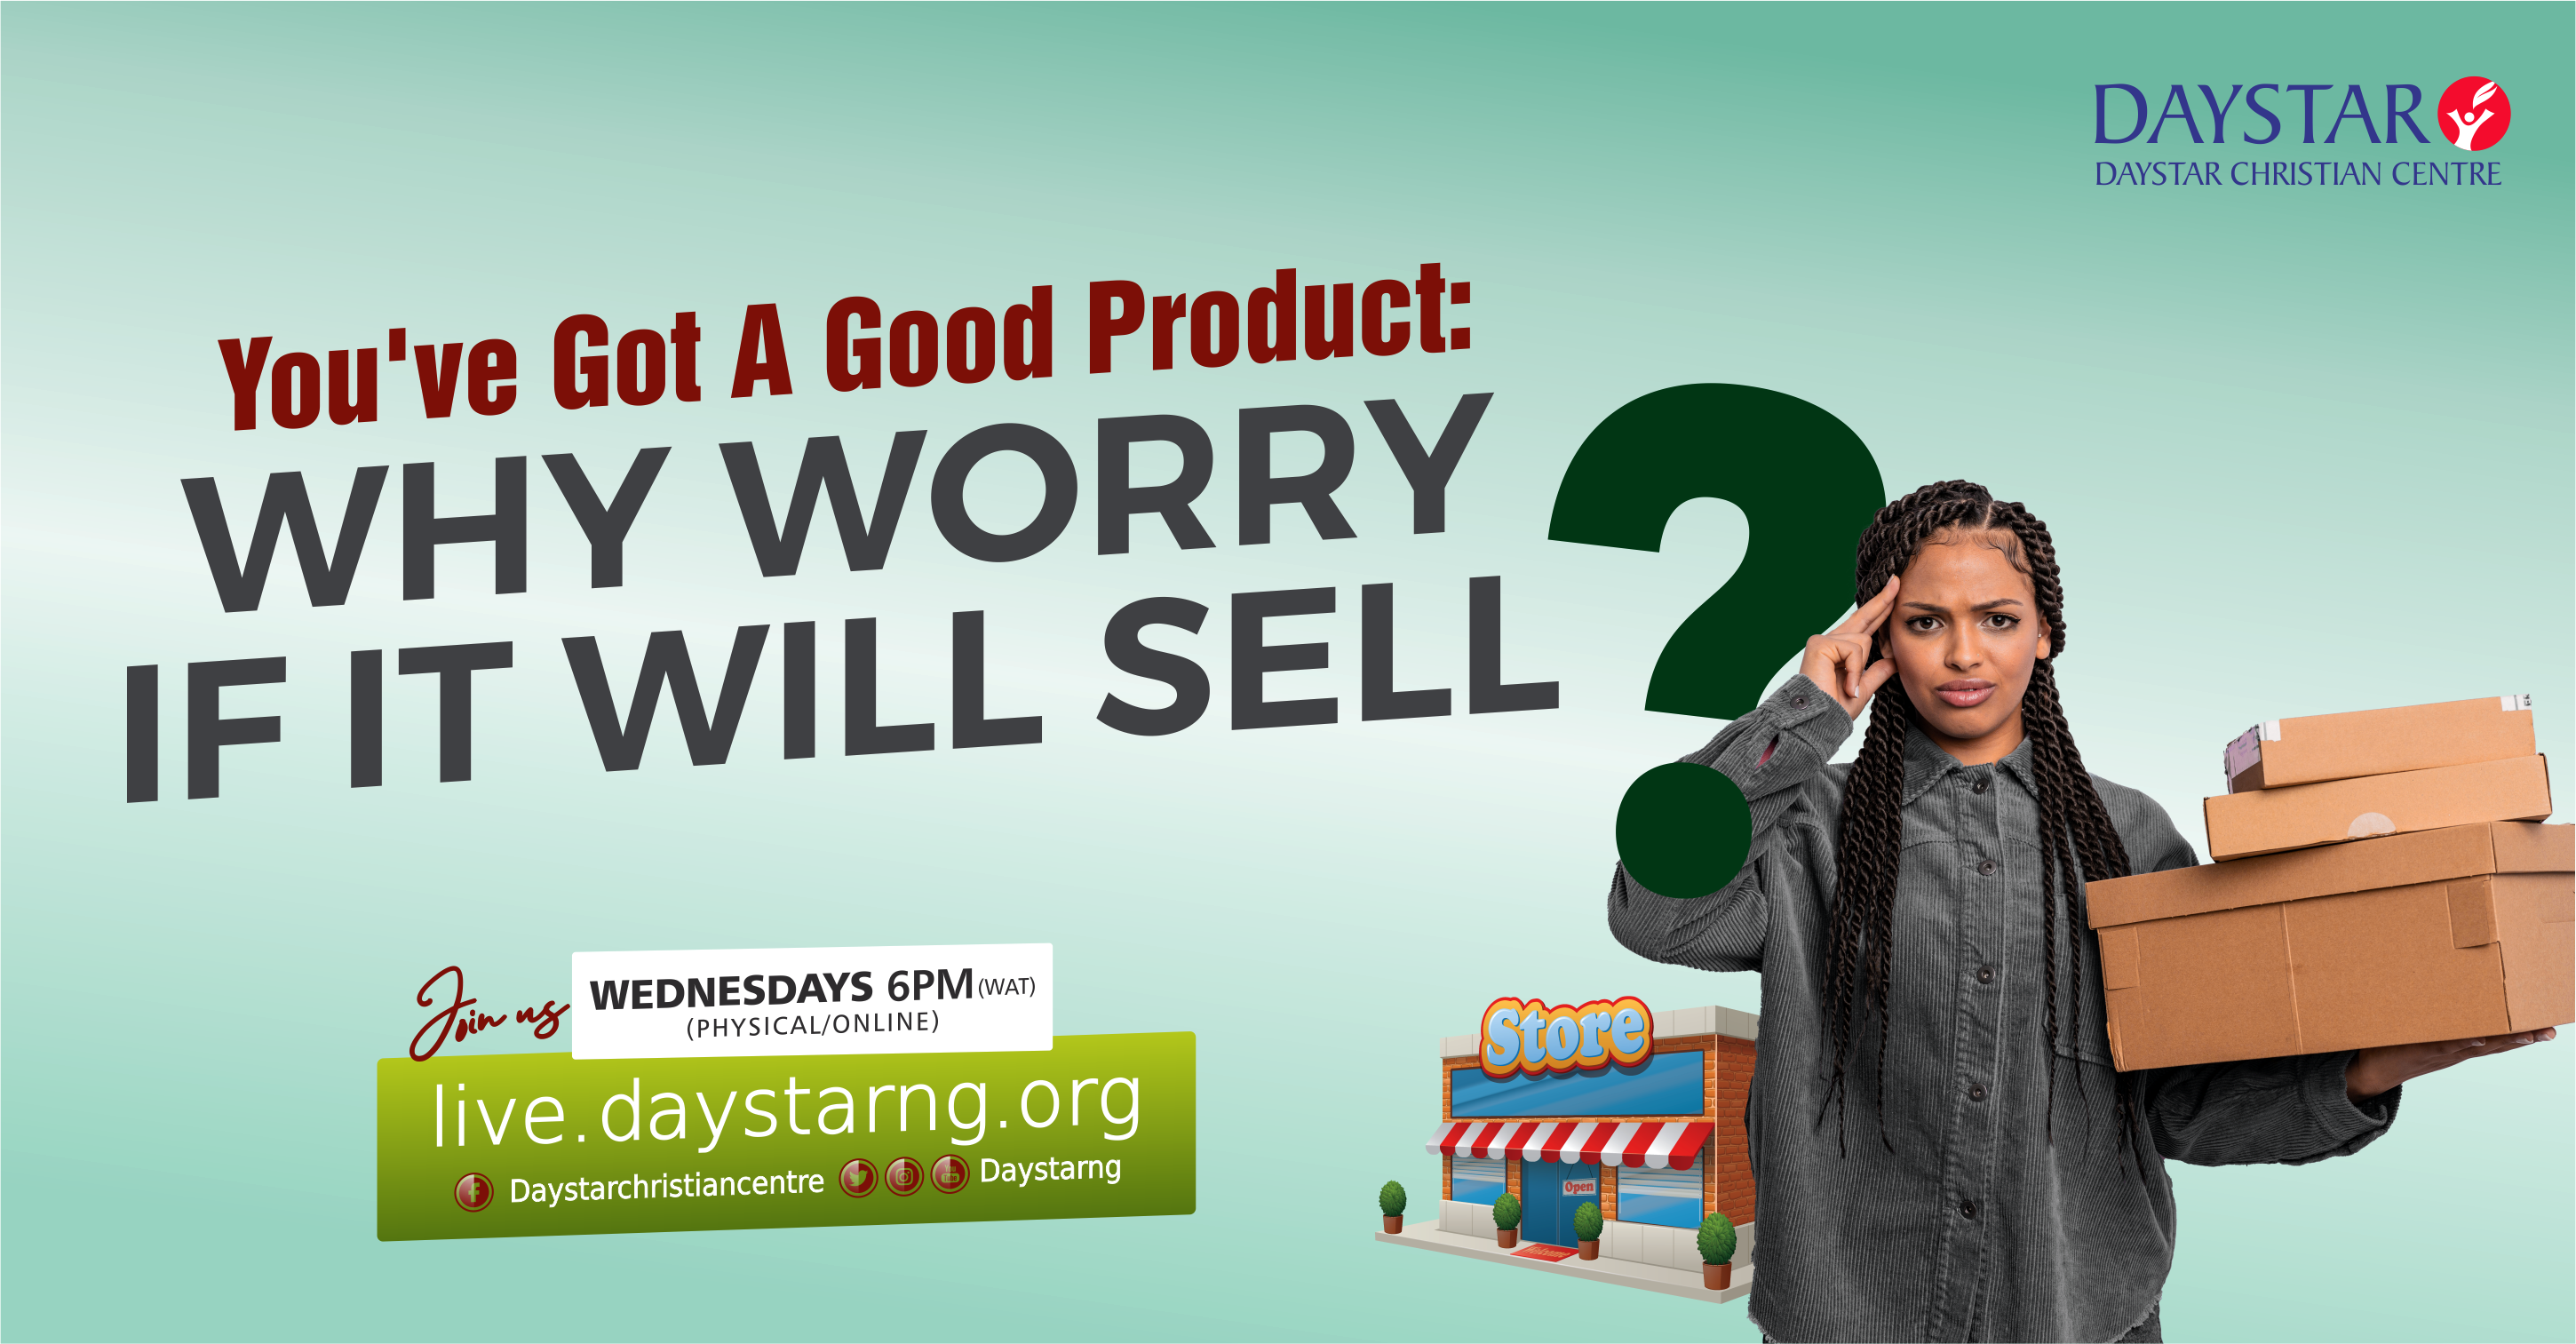 You’ve Got A Good Product: Why Worry If It Will Sell?